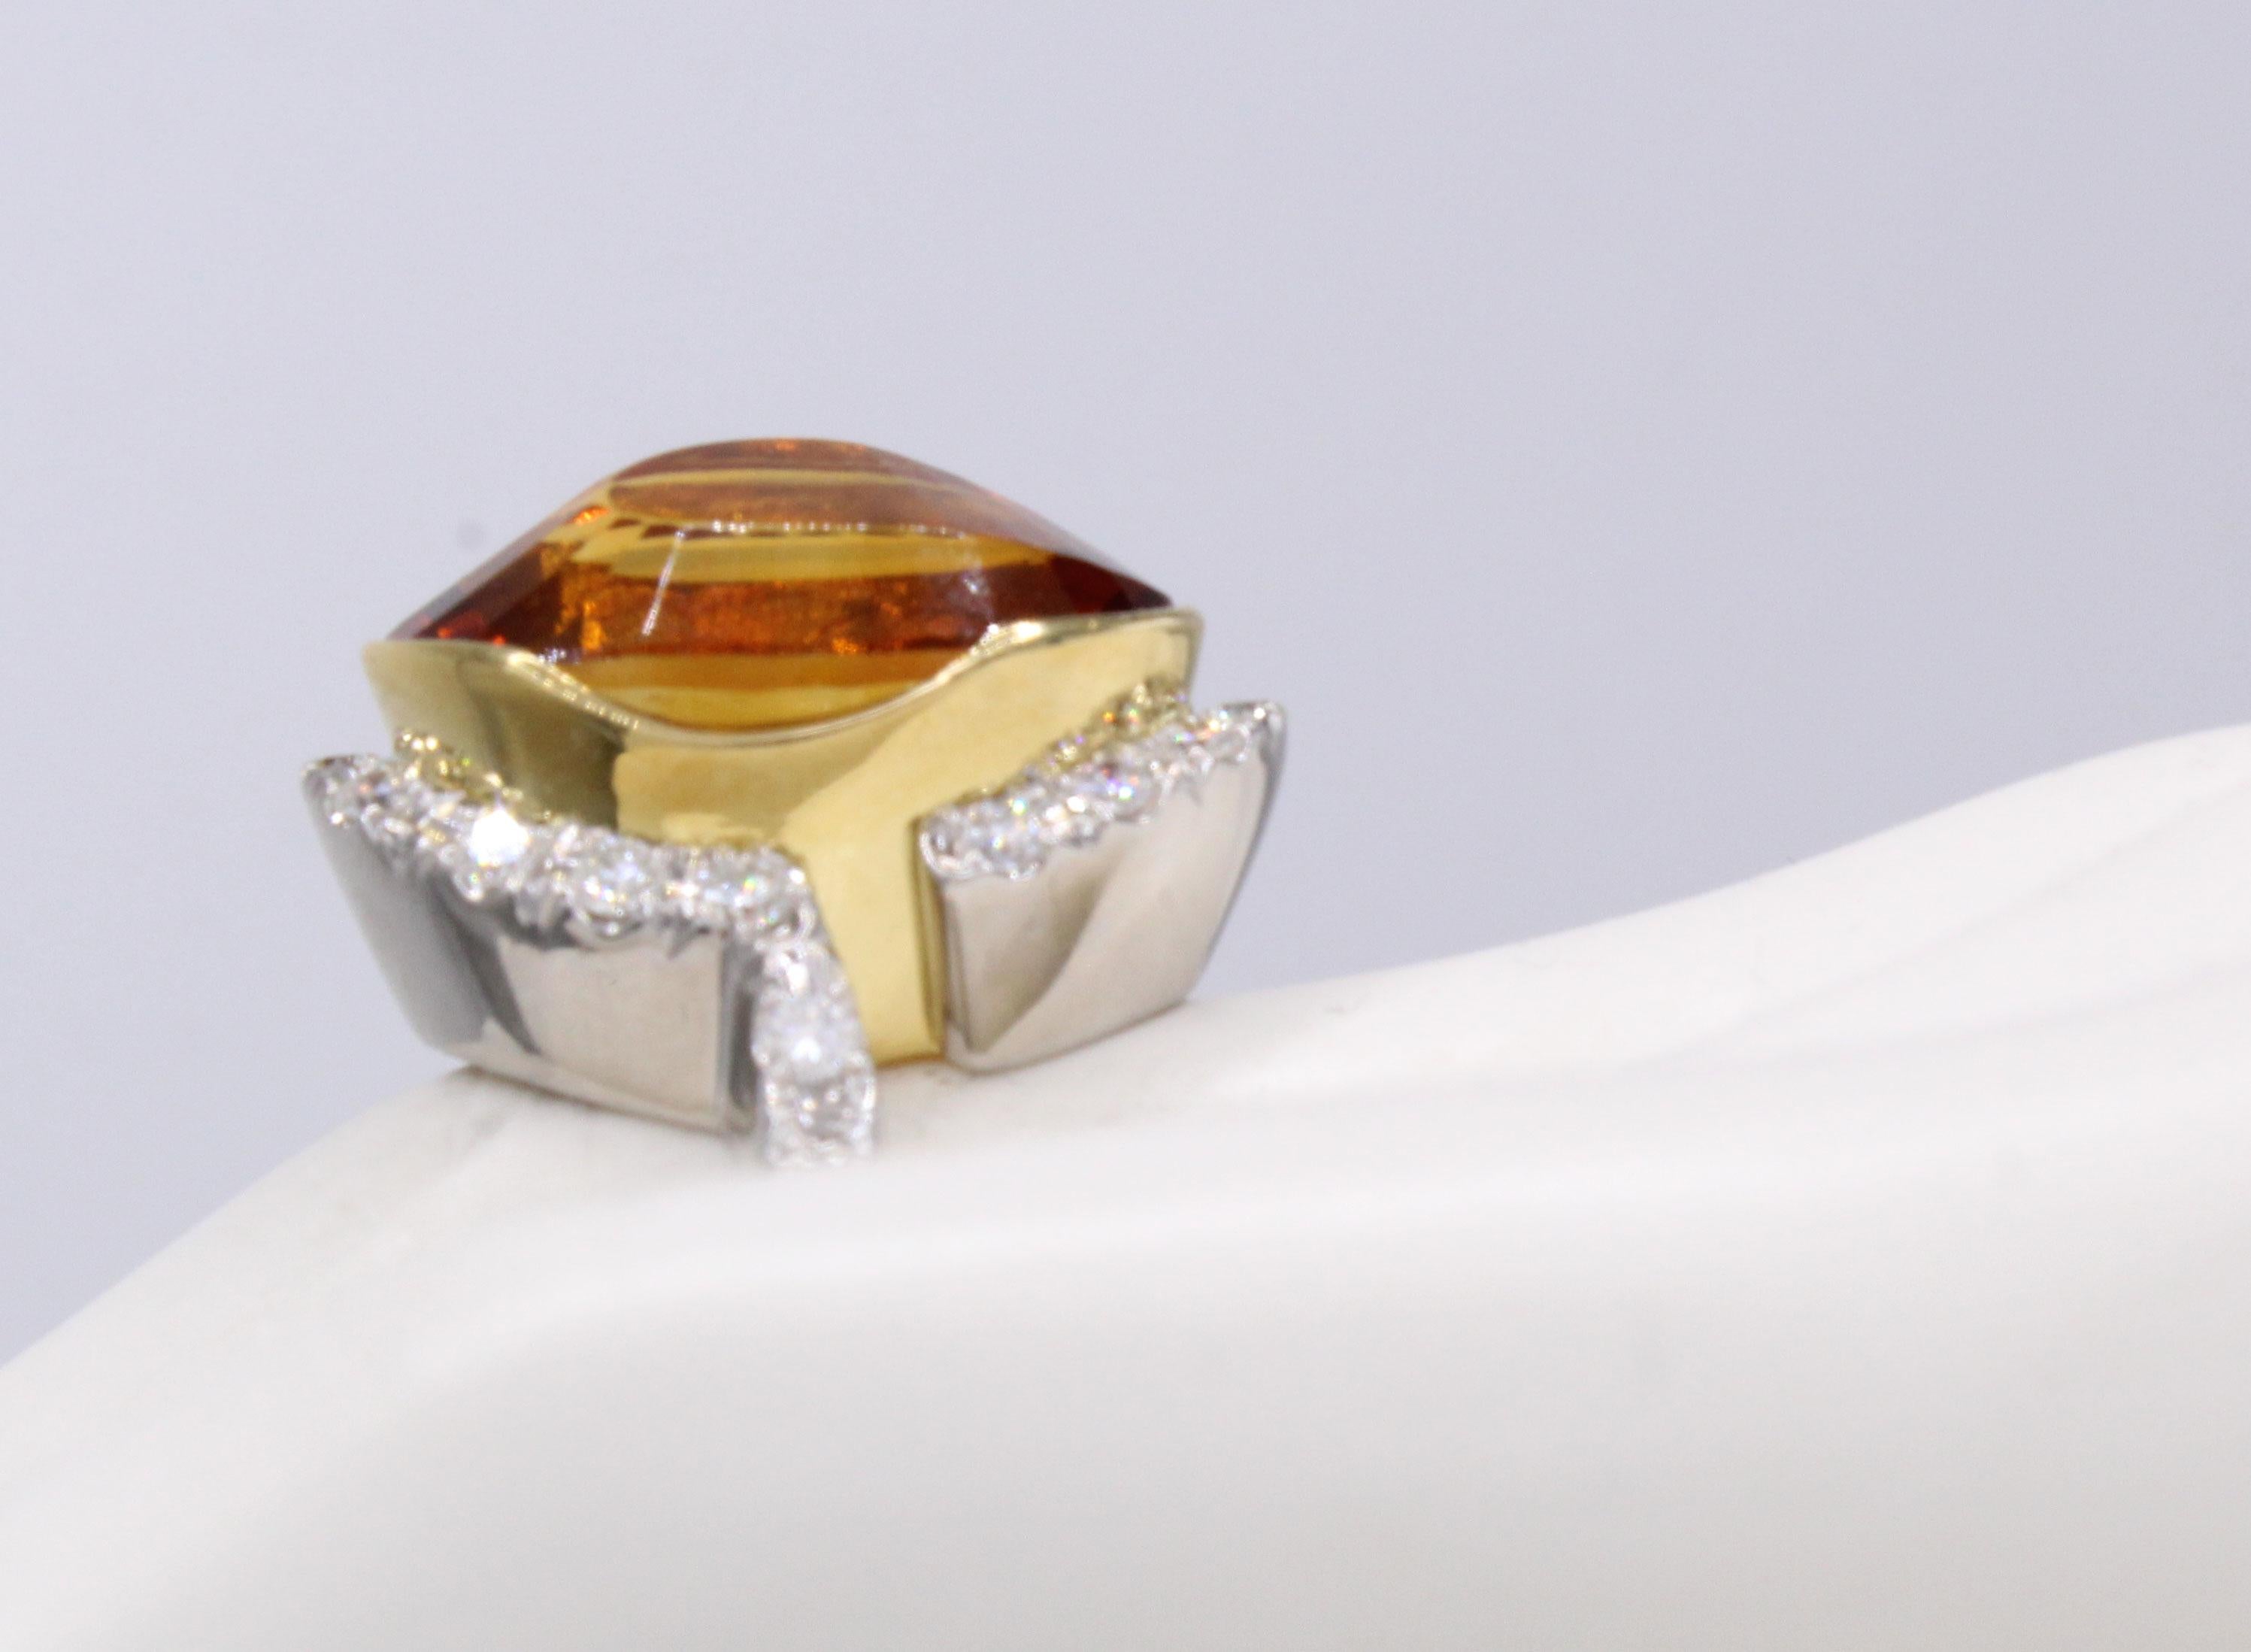  Unique 1970s Madeira Citrine Diamond Platinum 18 Karat Gold Ring In Excellent Condition For Sale In New York, NY